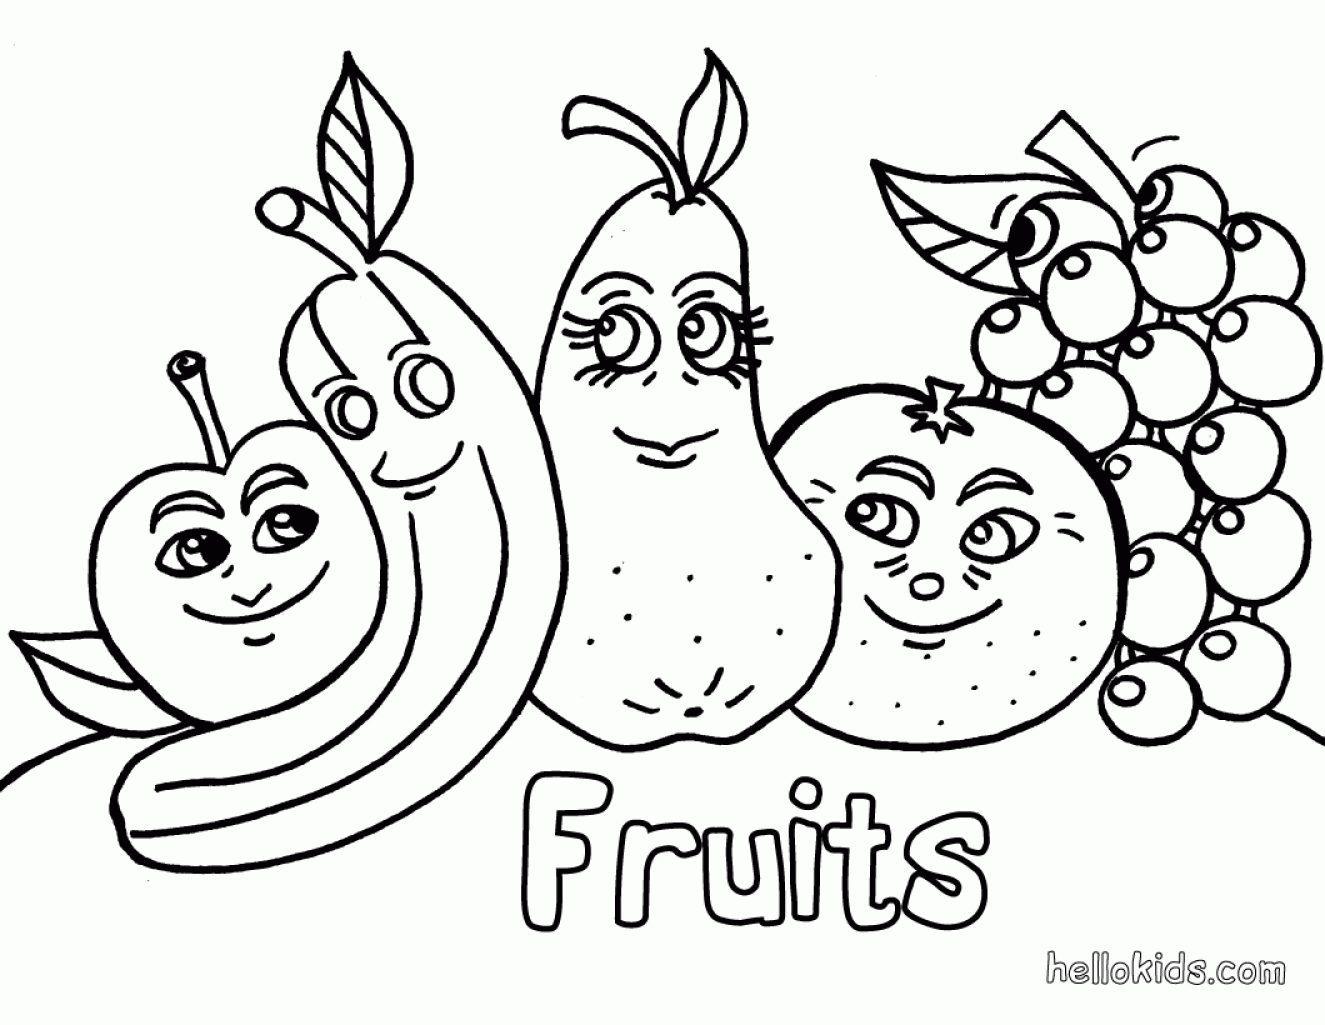 Fruit Coloring Pages Free Printable Coloring Pagesfruit Coloring ...